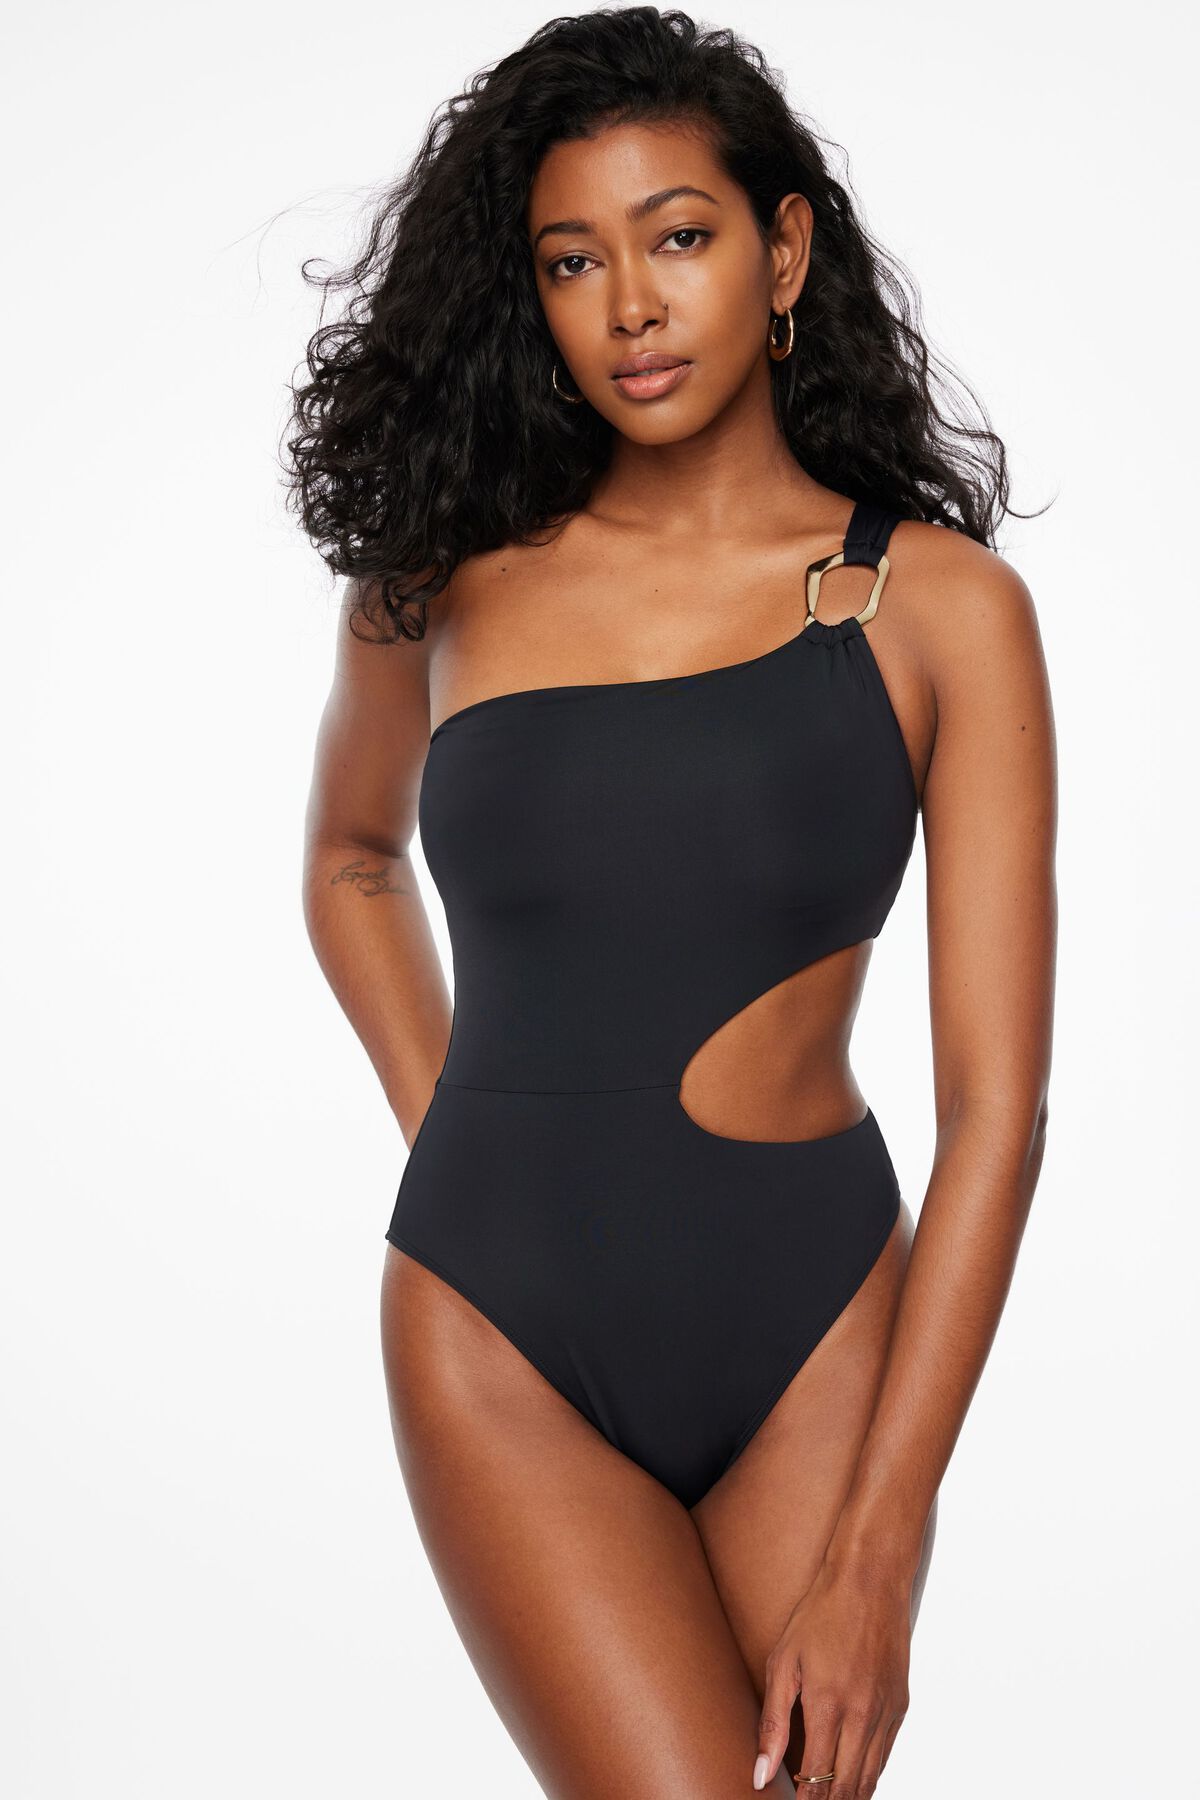 2023 Summer Womens High Leg Cut Out One Shoulder Monokini Black Cut Out  Swimsuit Sexy Black One Piece Swimwear T230524 From Mengyang04, $6.82